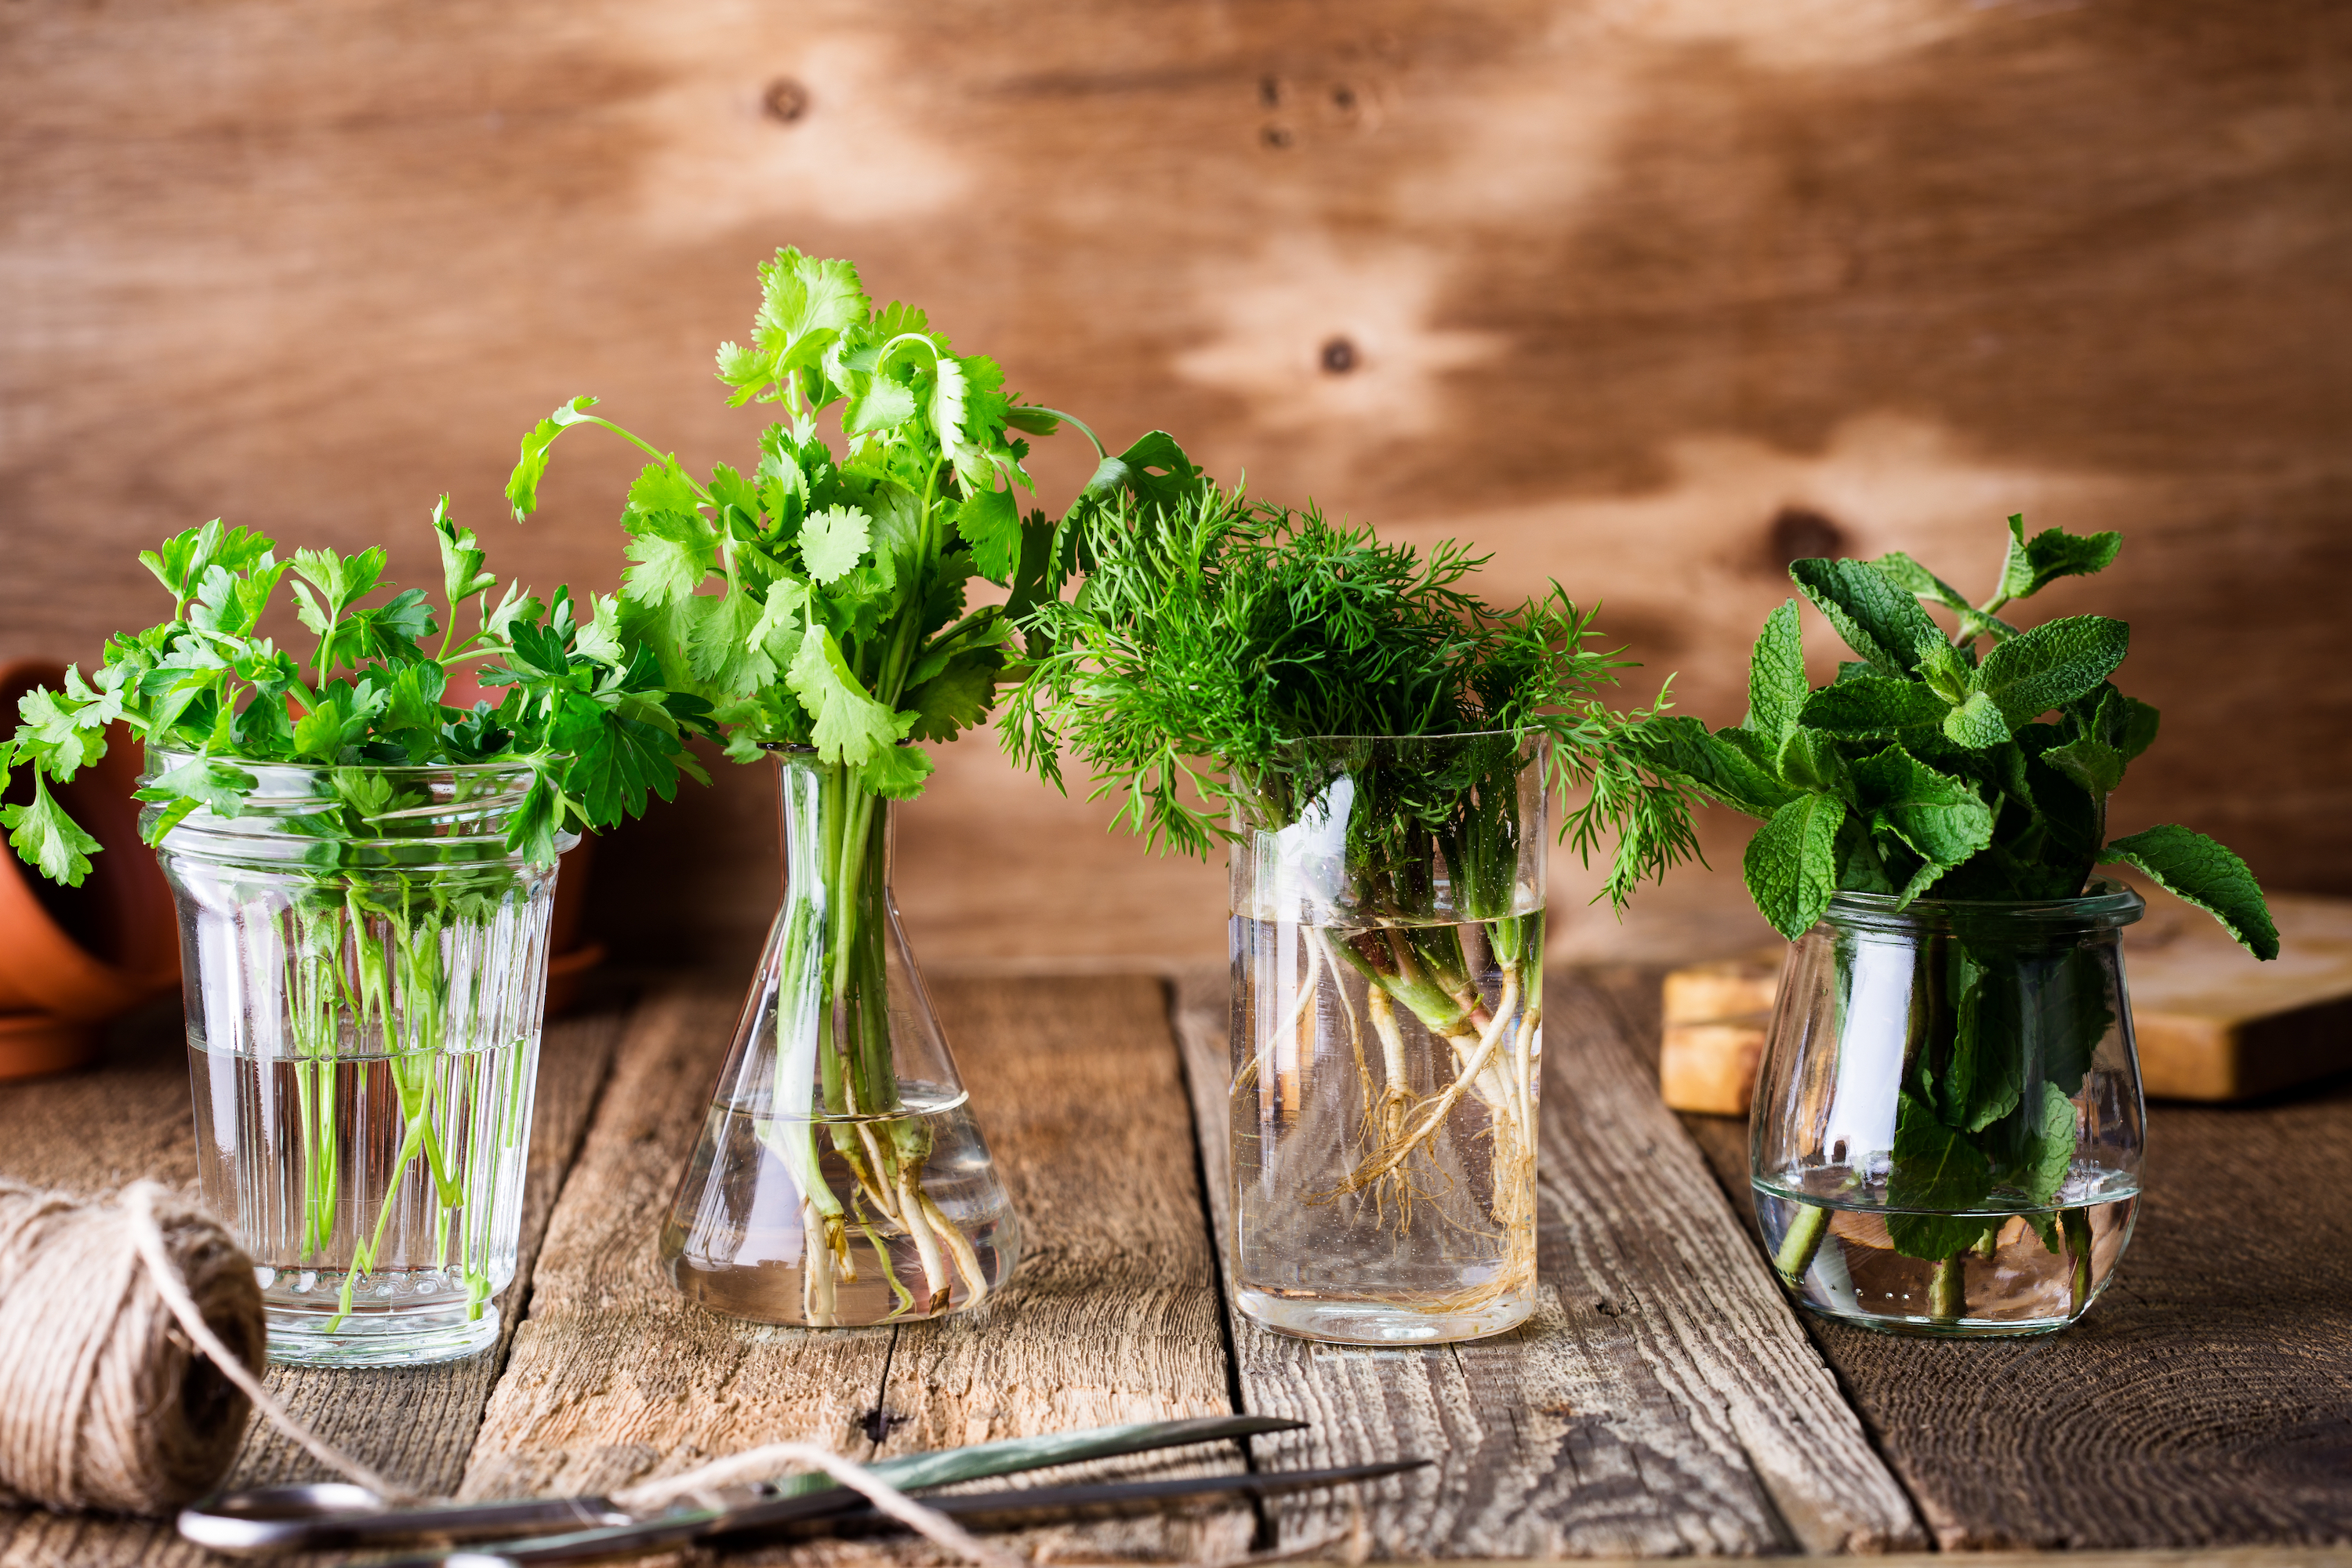 Herbs in glass to show how to store